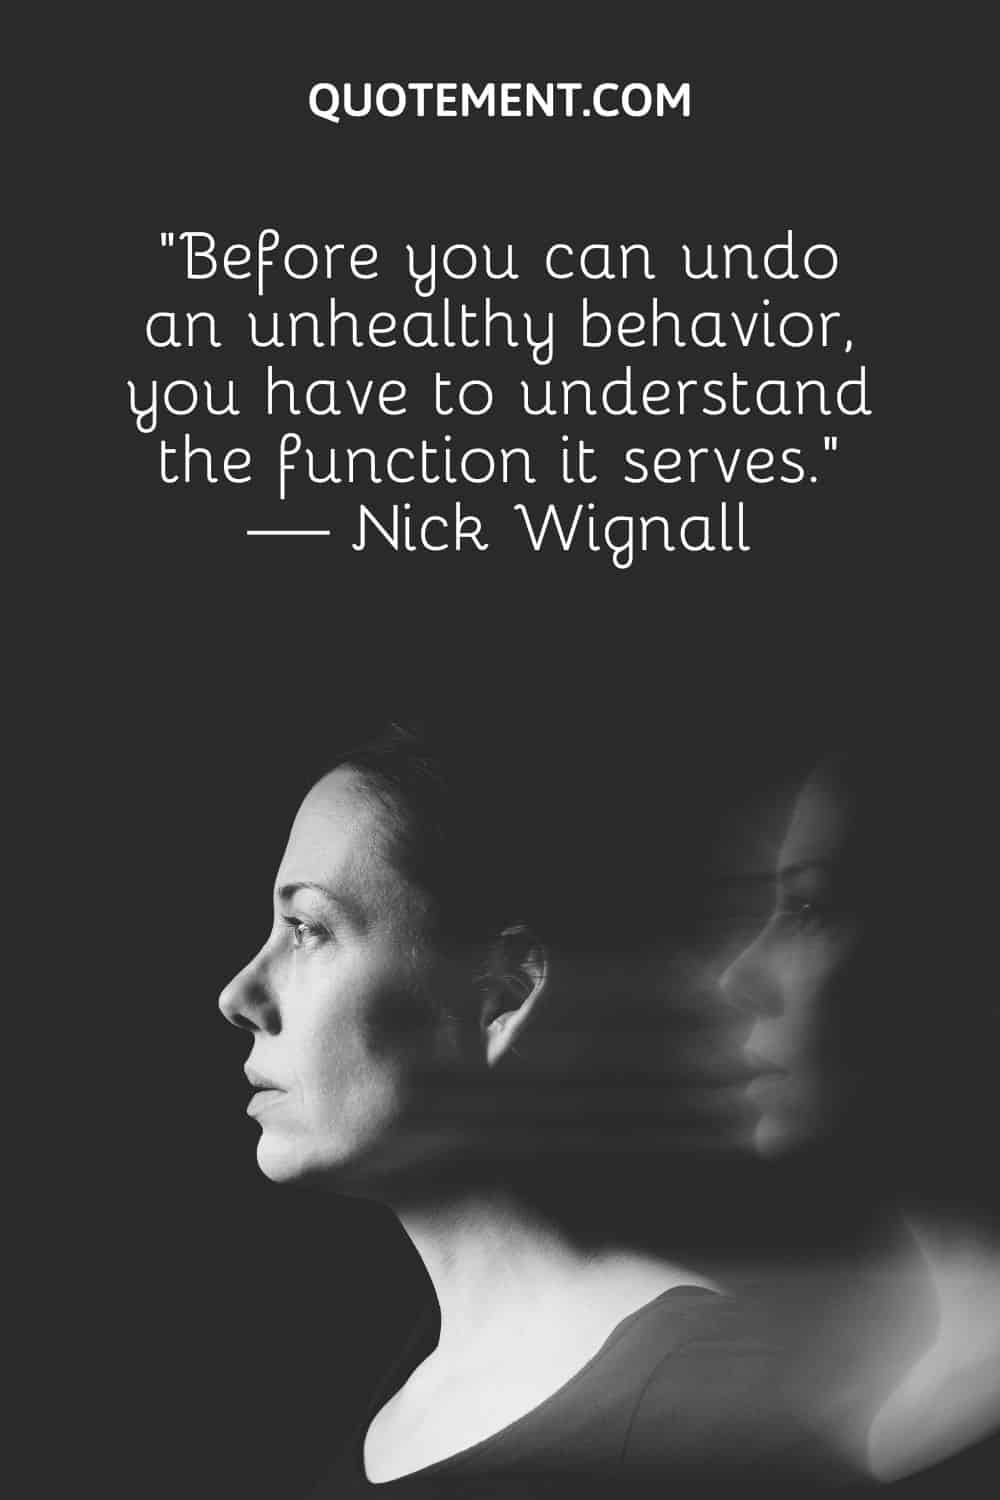 “Before you can undo an unhealthy behavior, you have to understand the function it serves.” — Nick Wignall